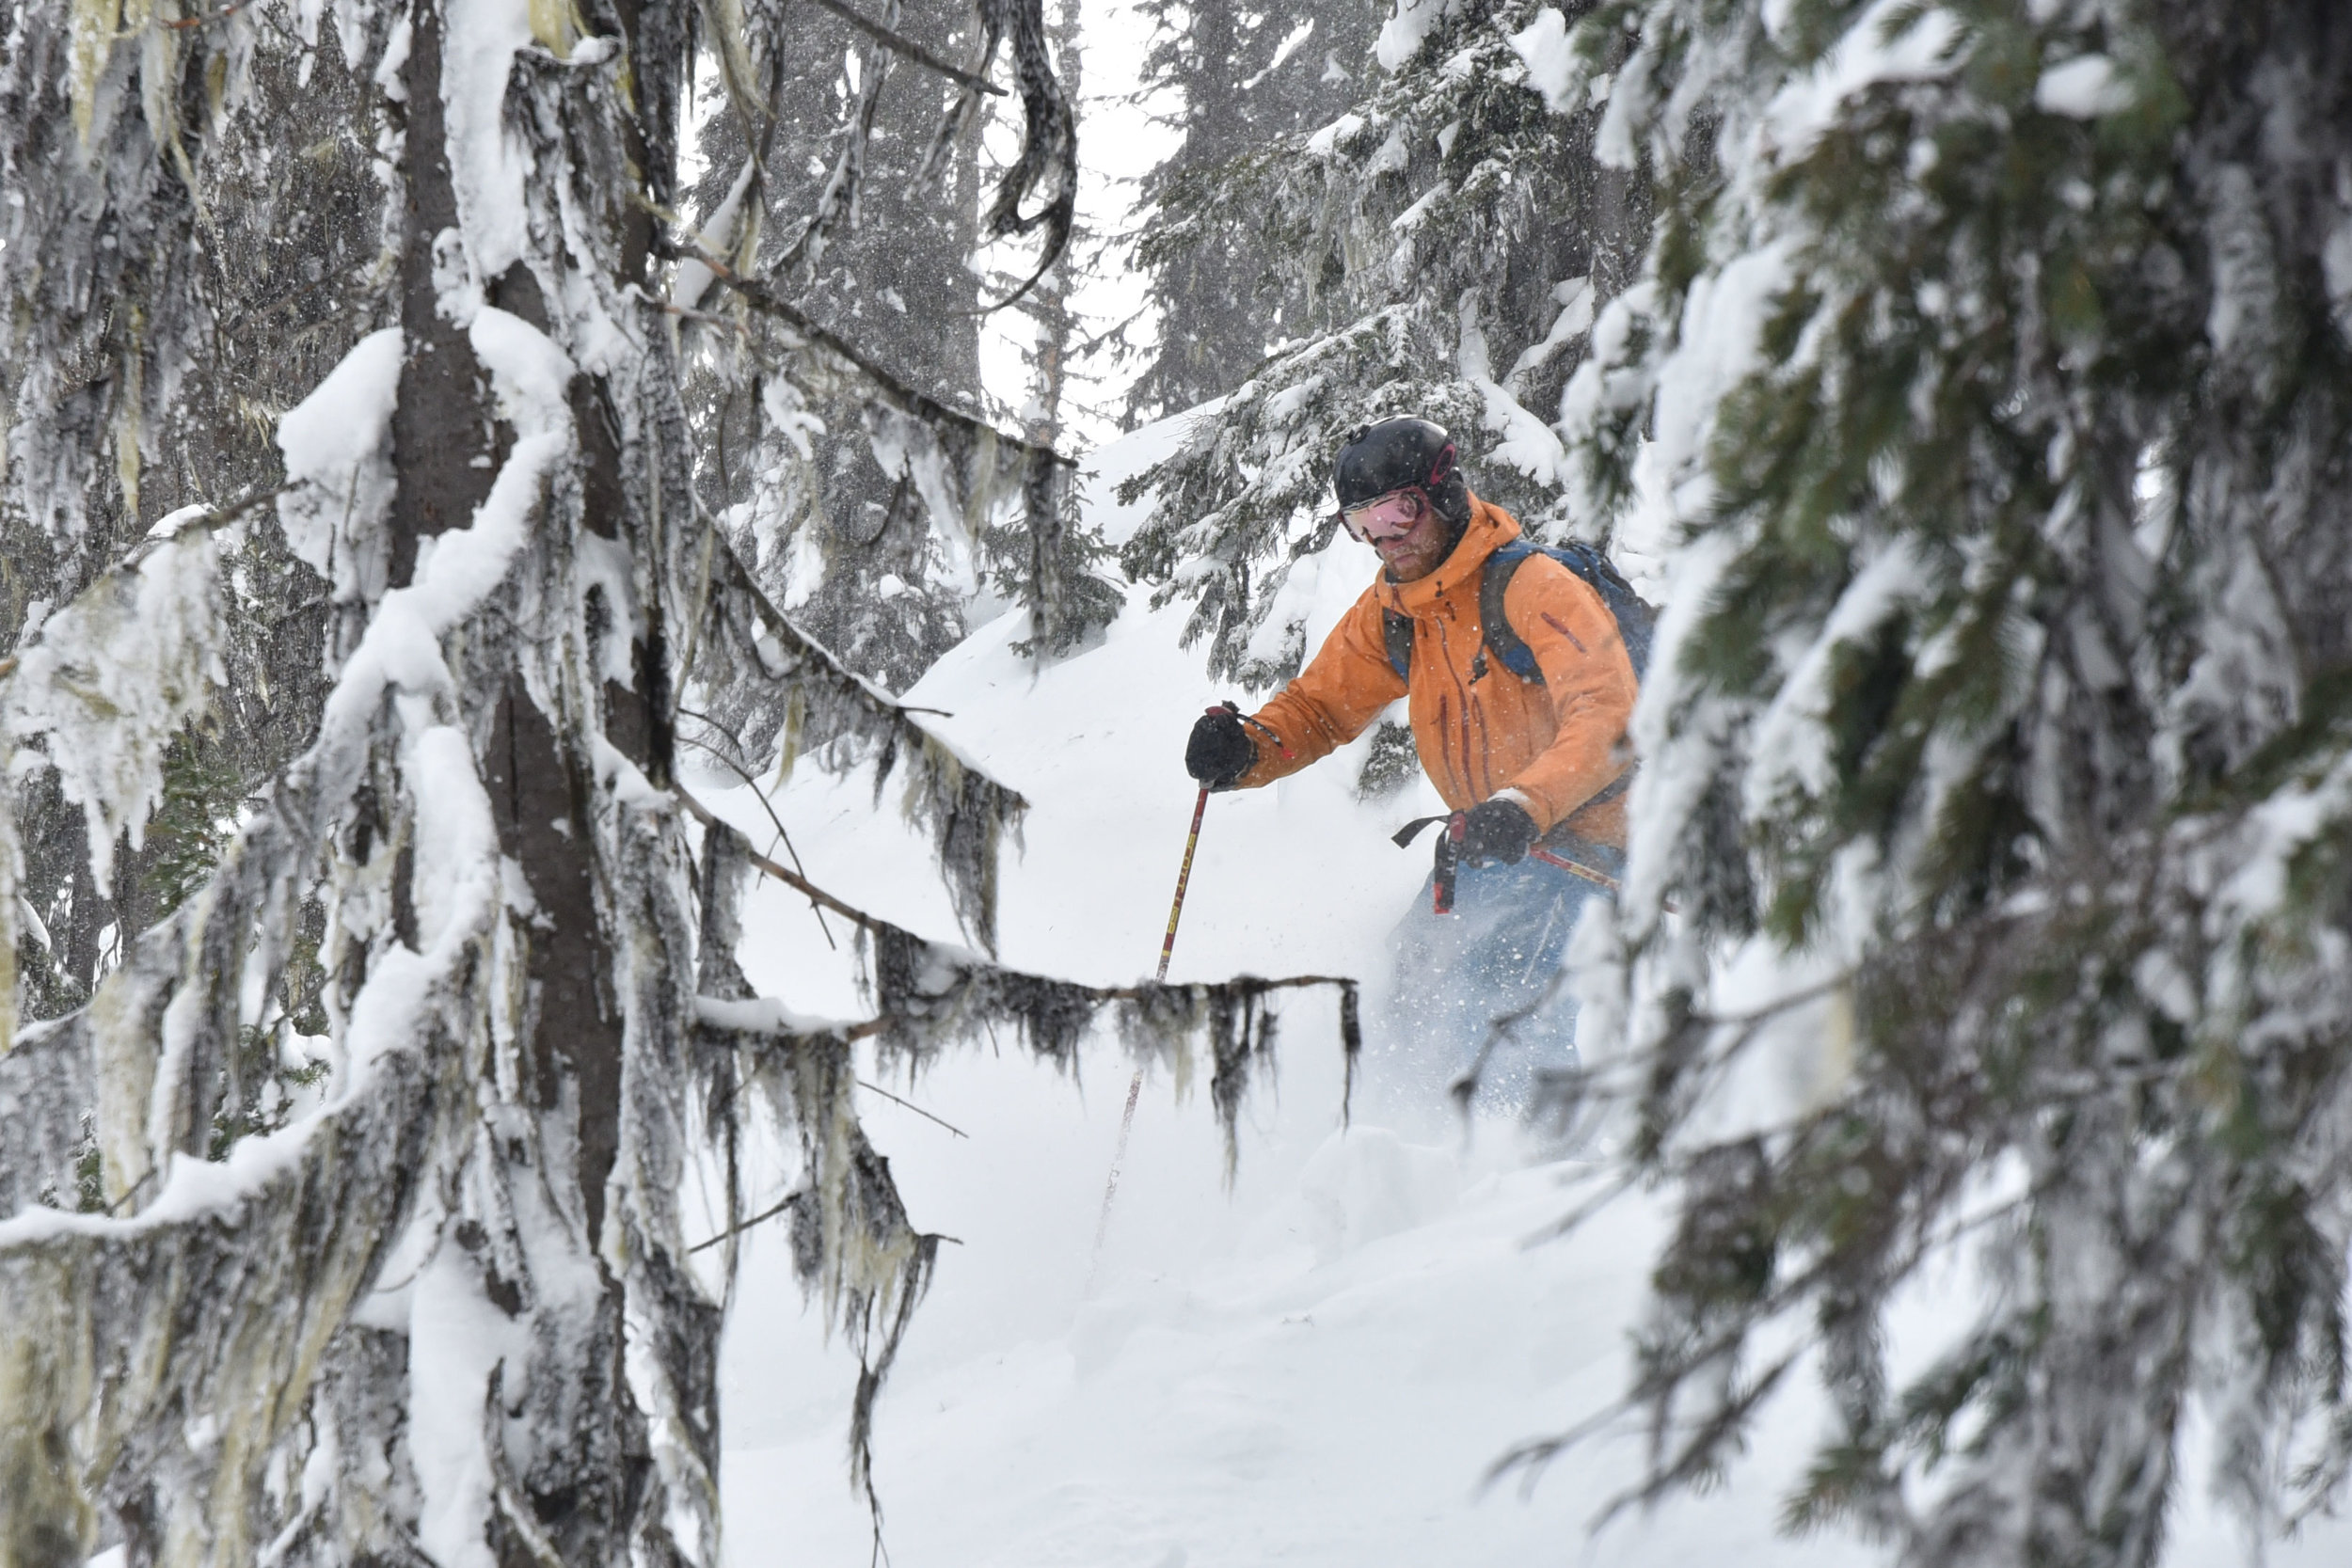 Guided skiing on the Powder Highway.